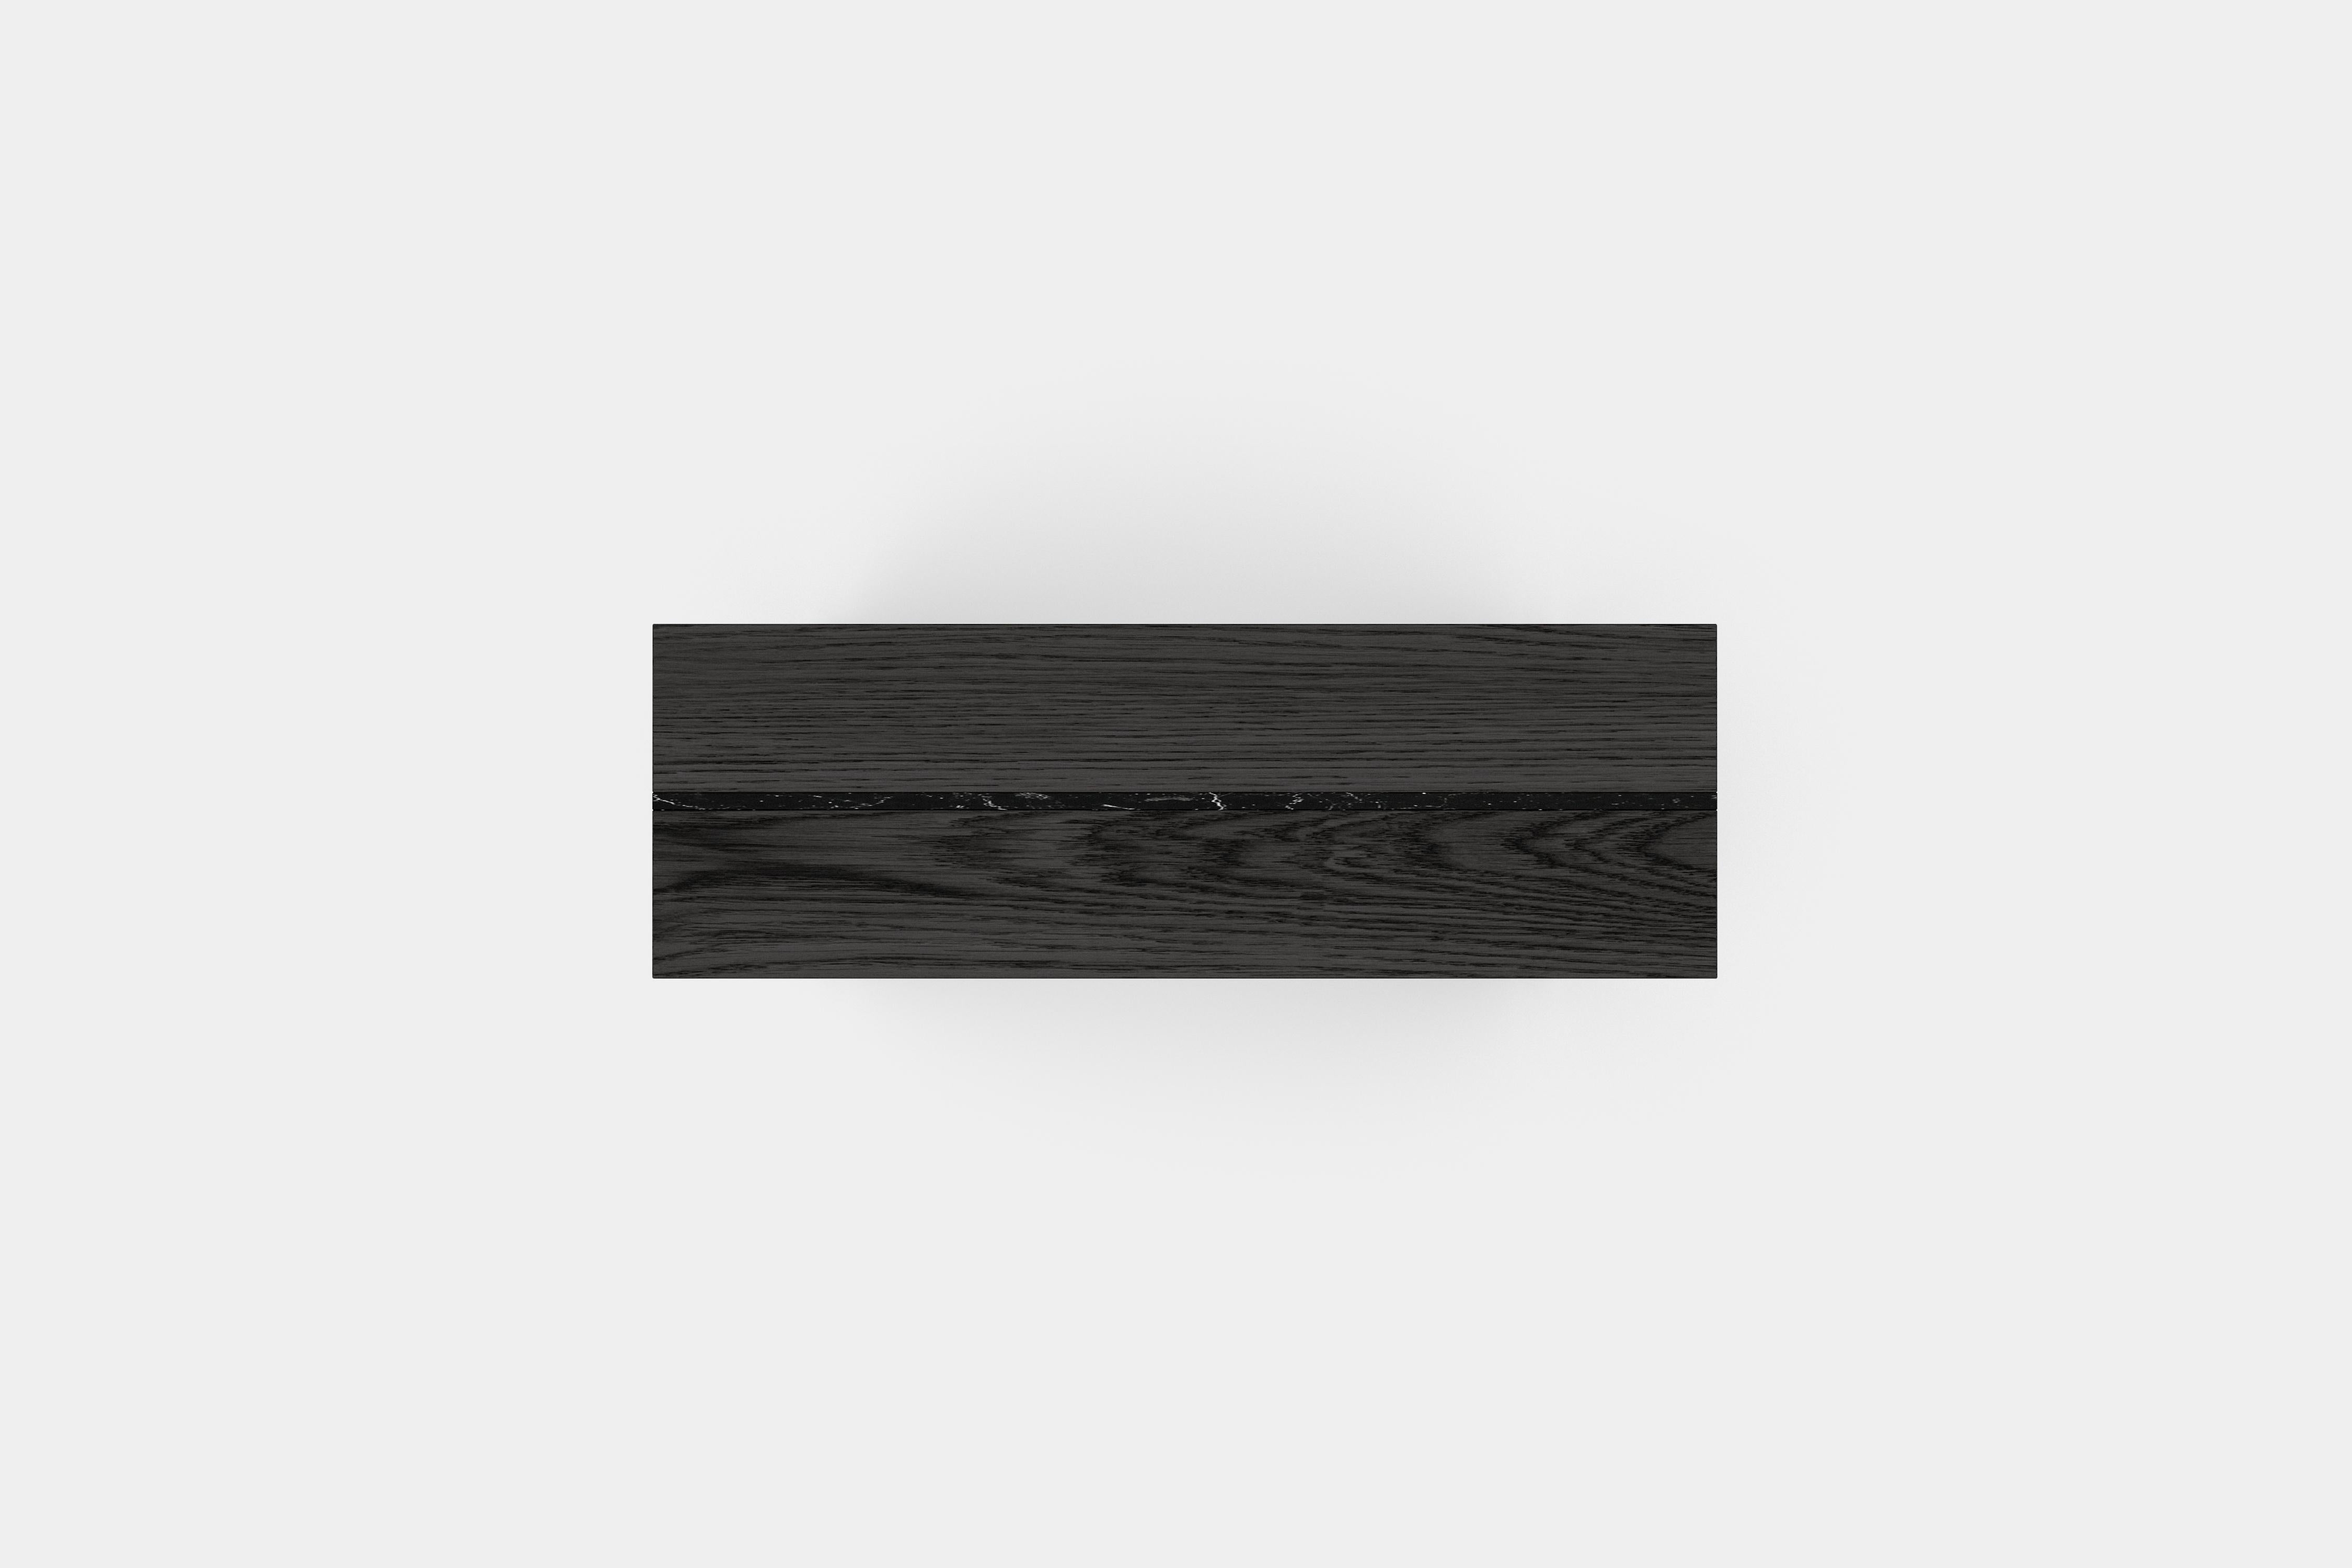 Laws of Motion Sideboard in Solid Black Wood, Console Table by Joel Escalona

Laws of Motion is a furniture collection that through a series of different typologies explores concepts like force, gravity and movement. Each of these functional